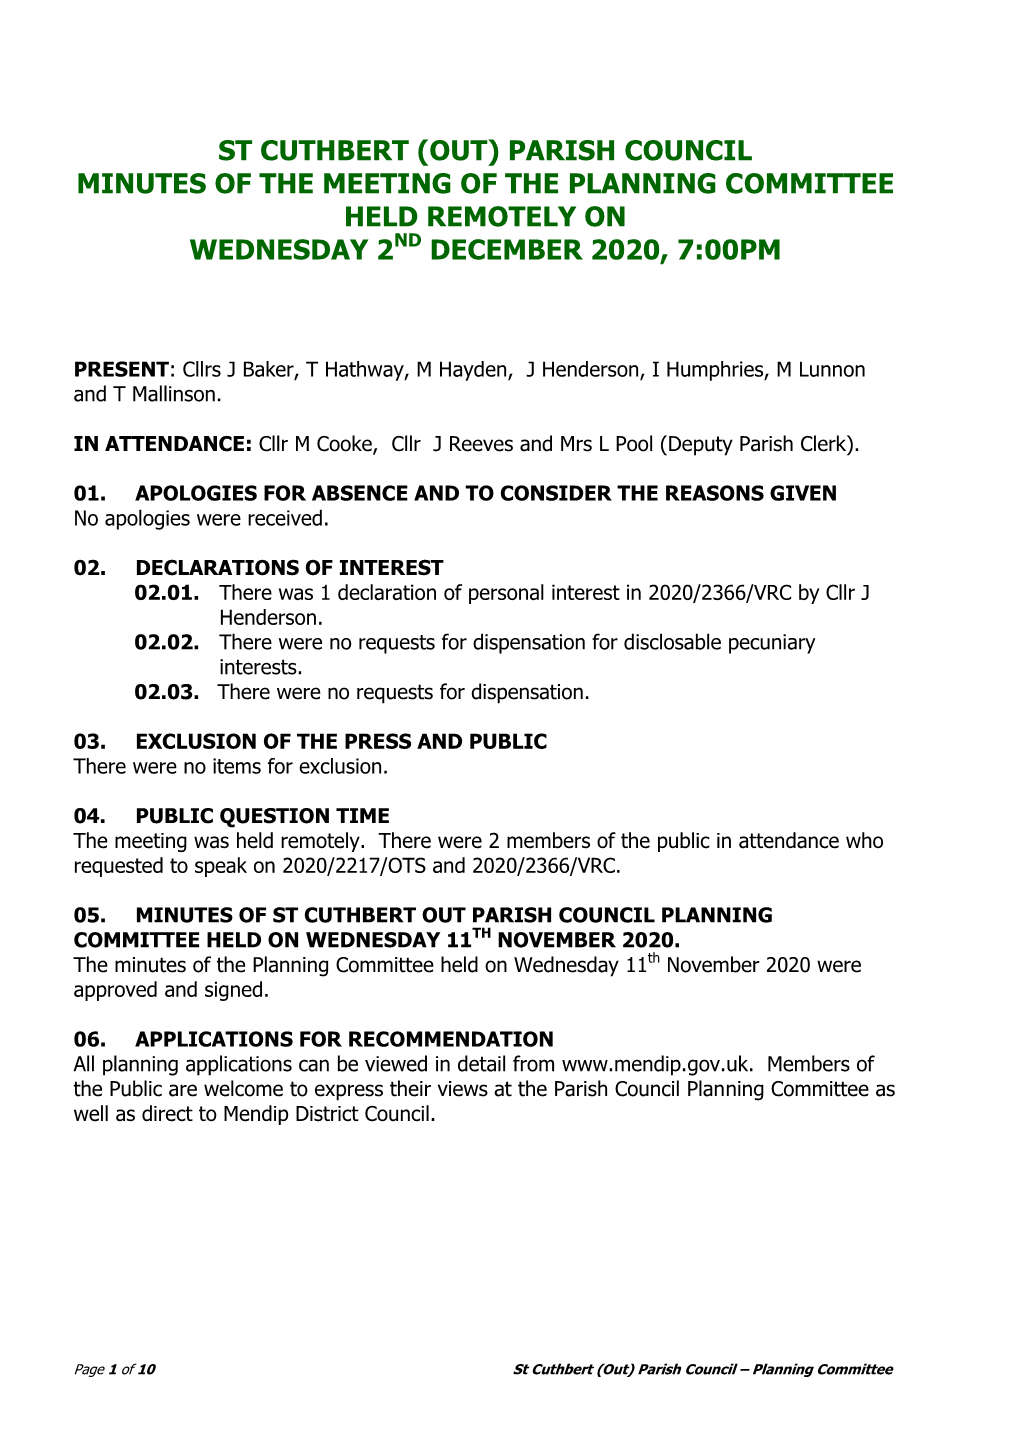 St Cuthbert (Out) Parish Council Minutes of the Meeting of the Planning Committee Held Remotely on Wednesday 2Nd December 2020, 7:00Pm